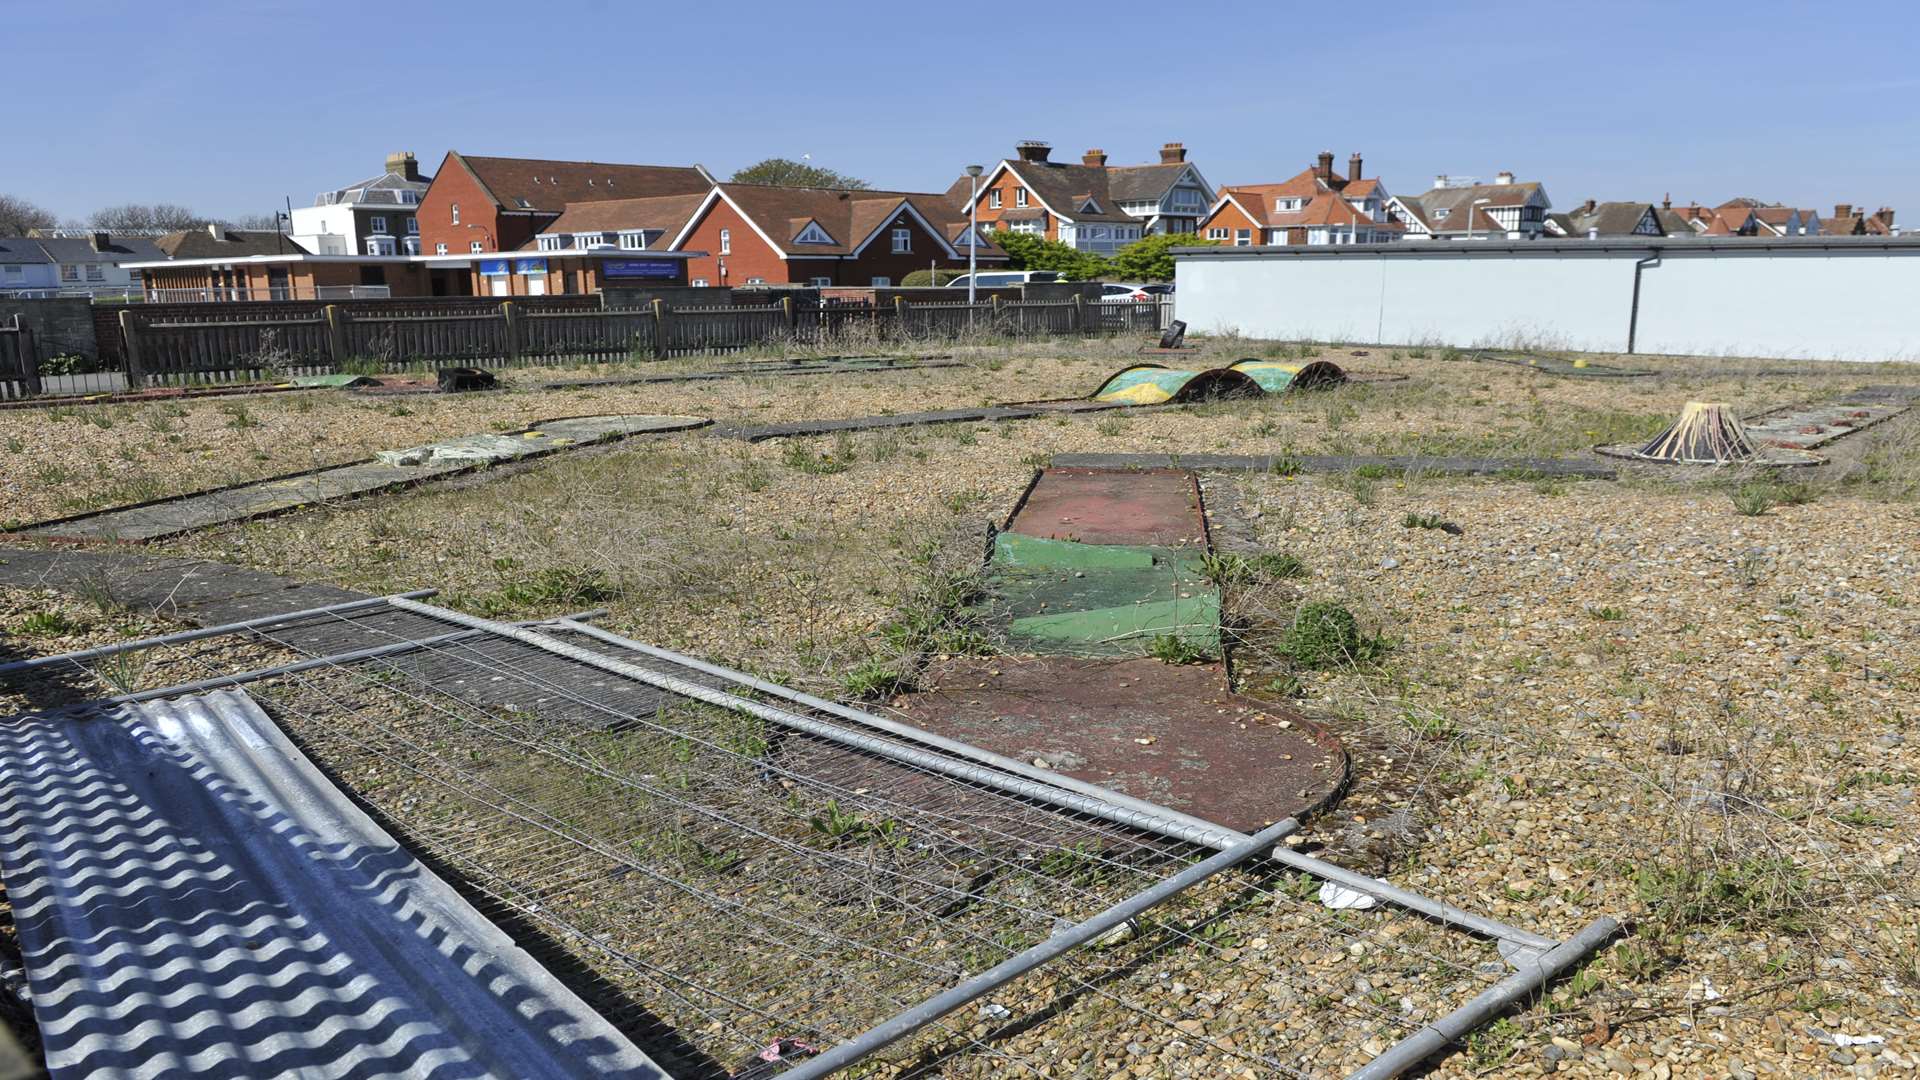 Walmer's former crazy golf course could soon be home to eleven beach huts